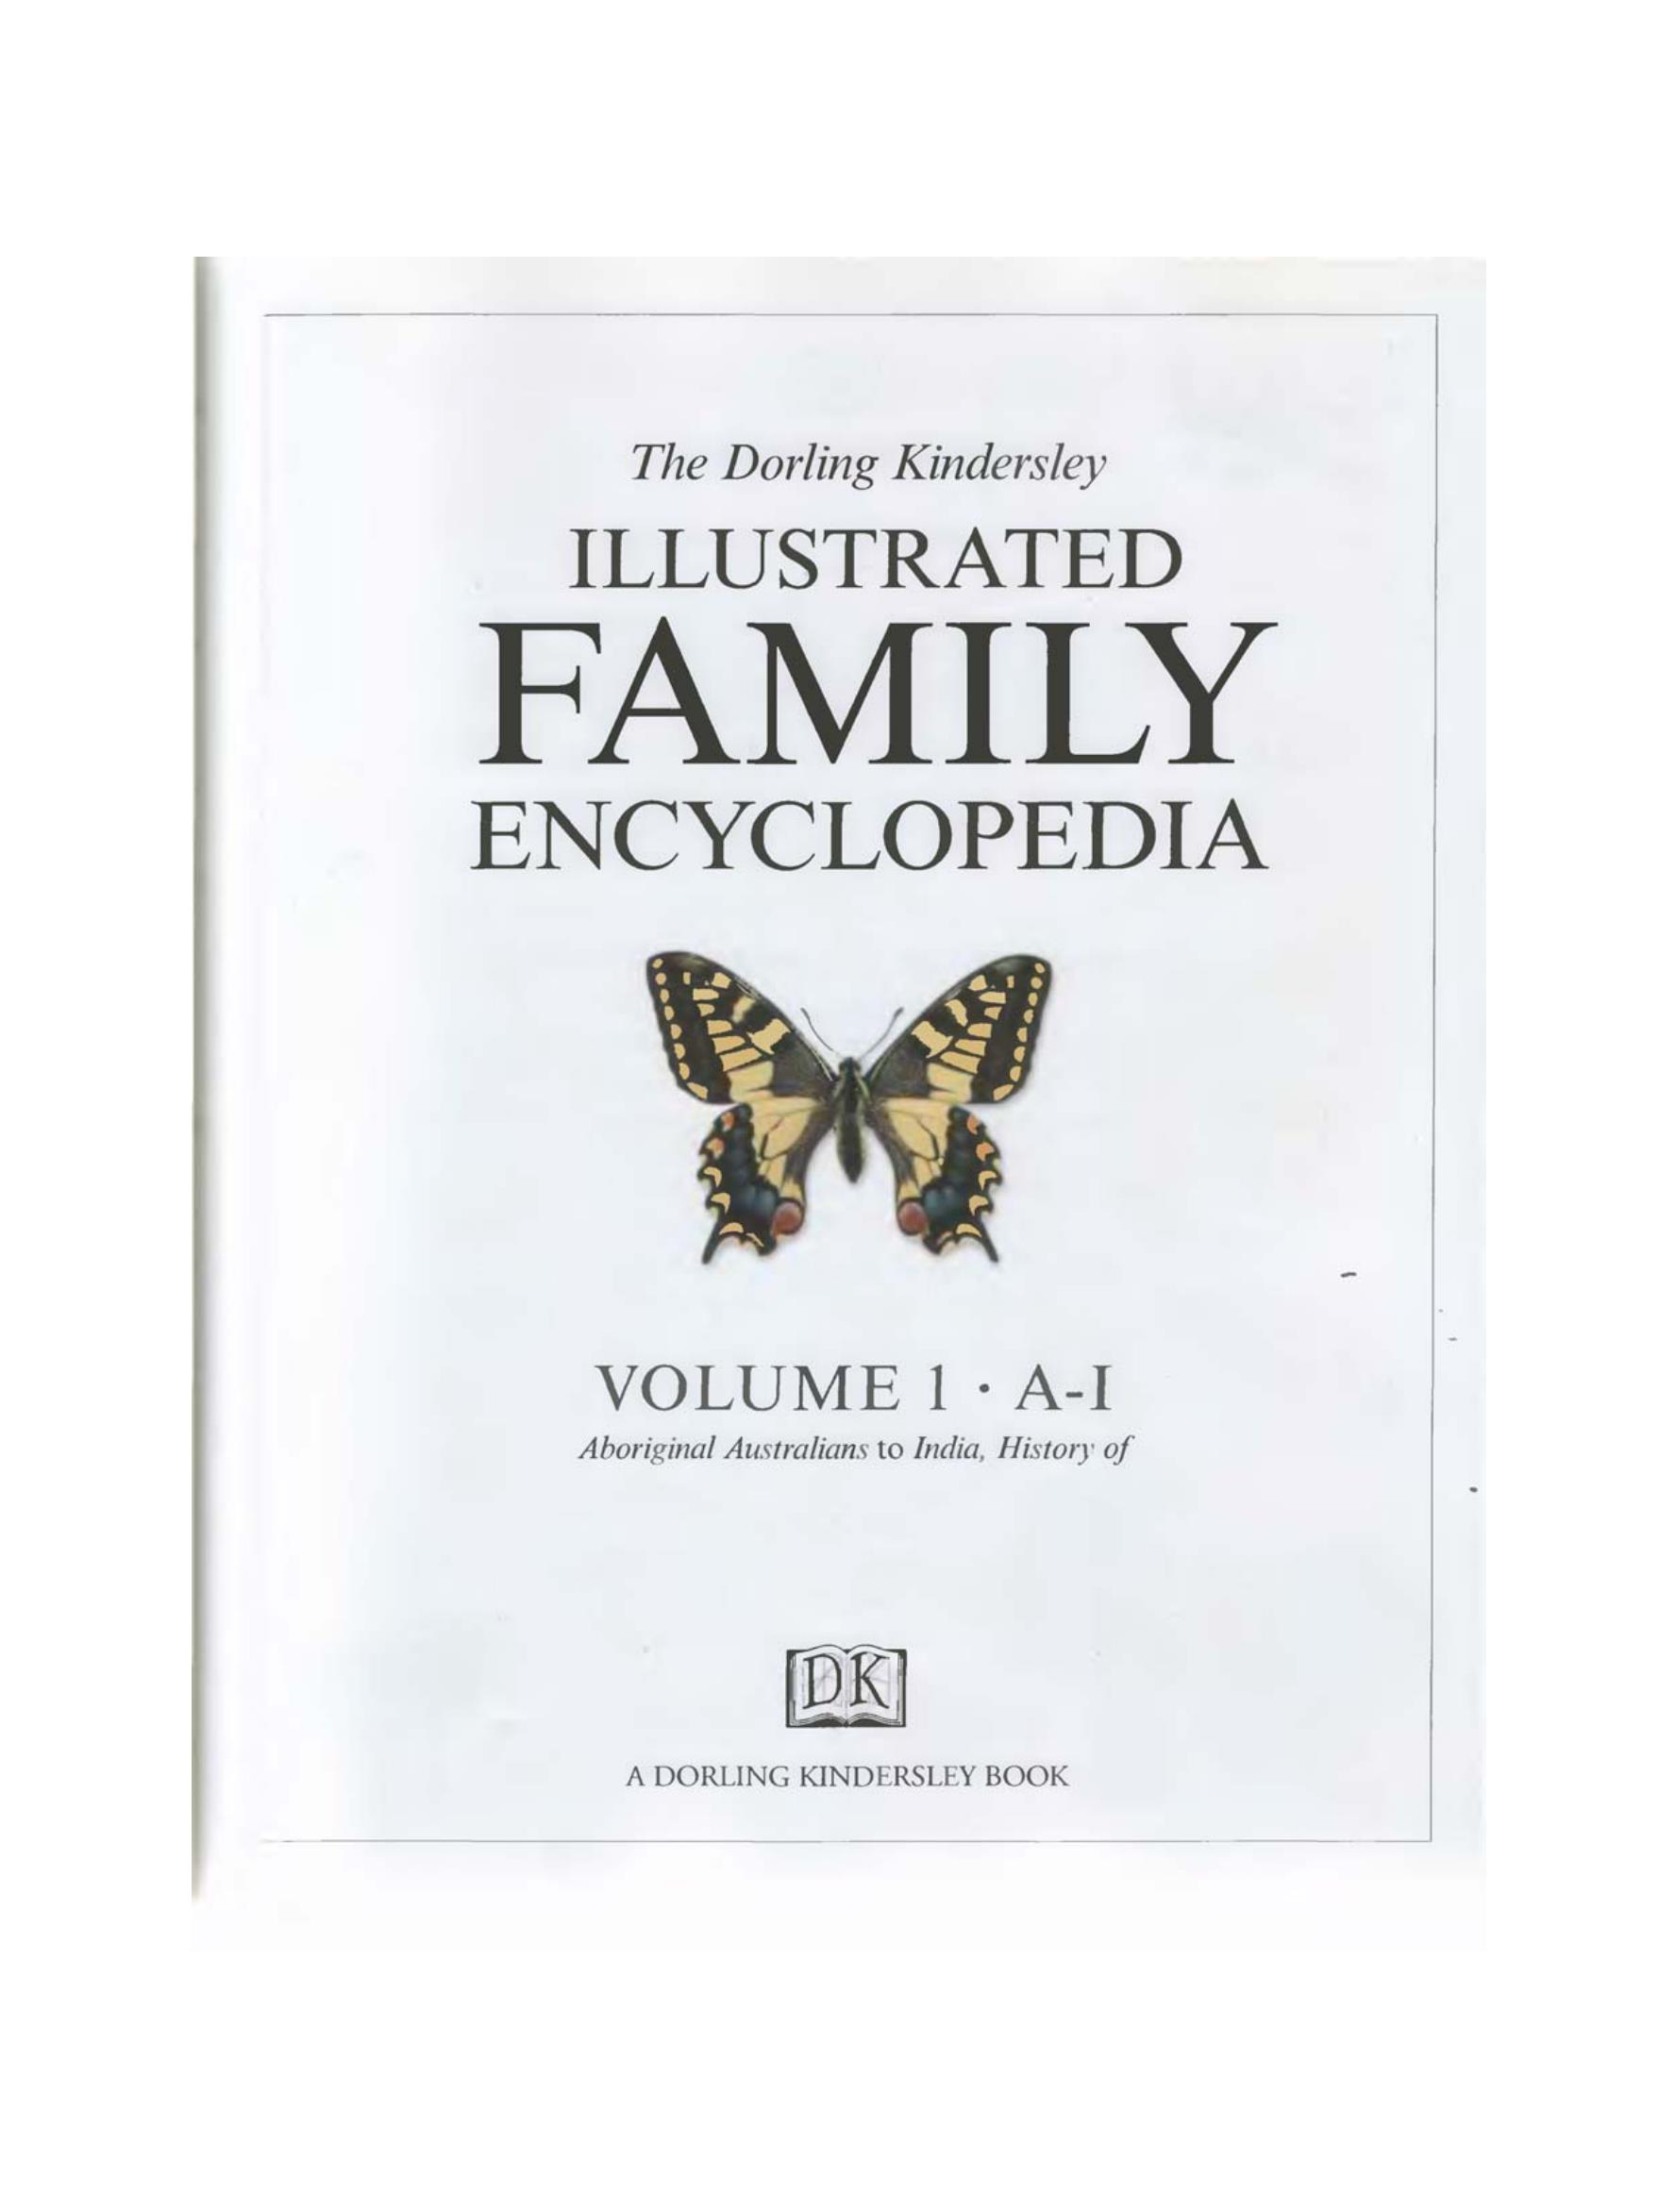 illustrated family encyclopedia pdf free download